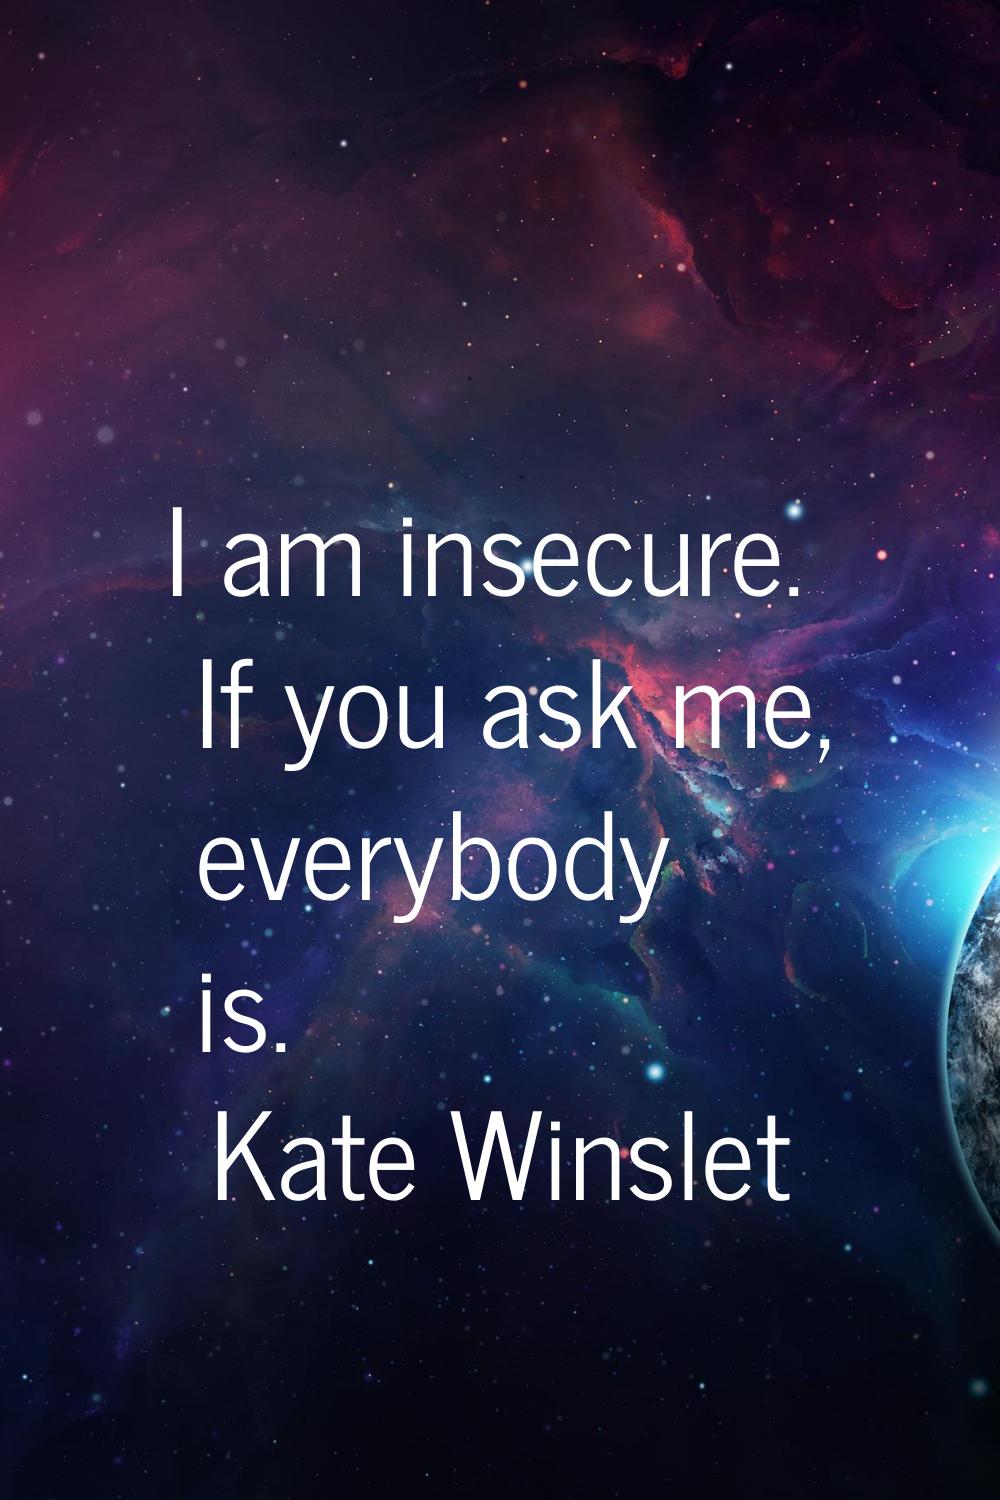 I am insecure. If you ask me, everybody is.